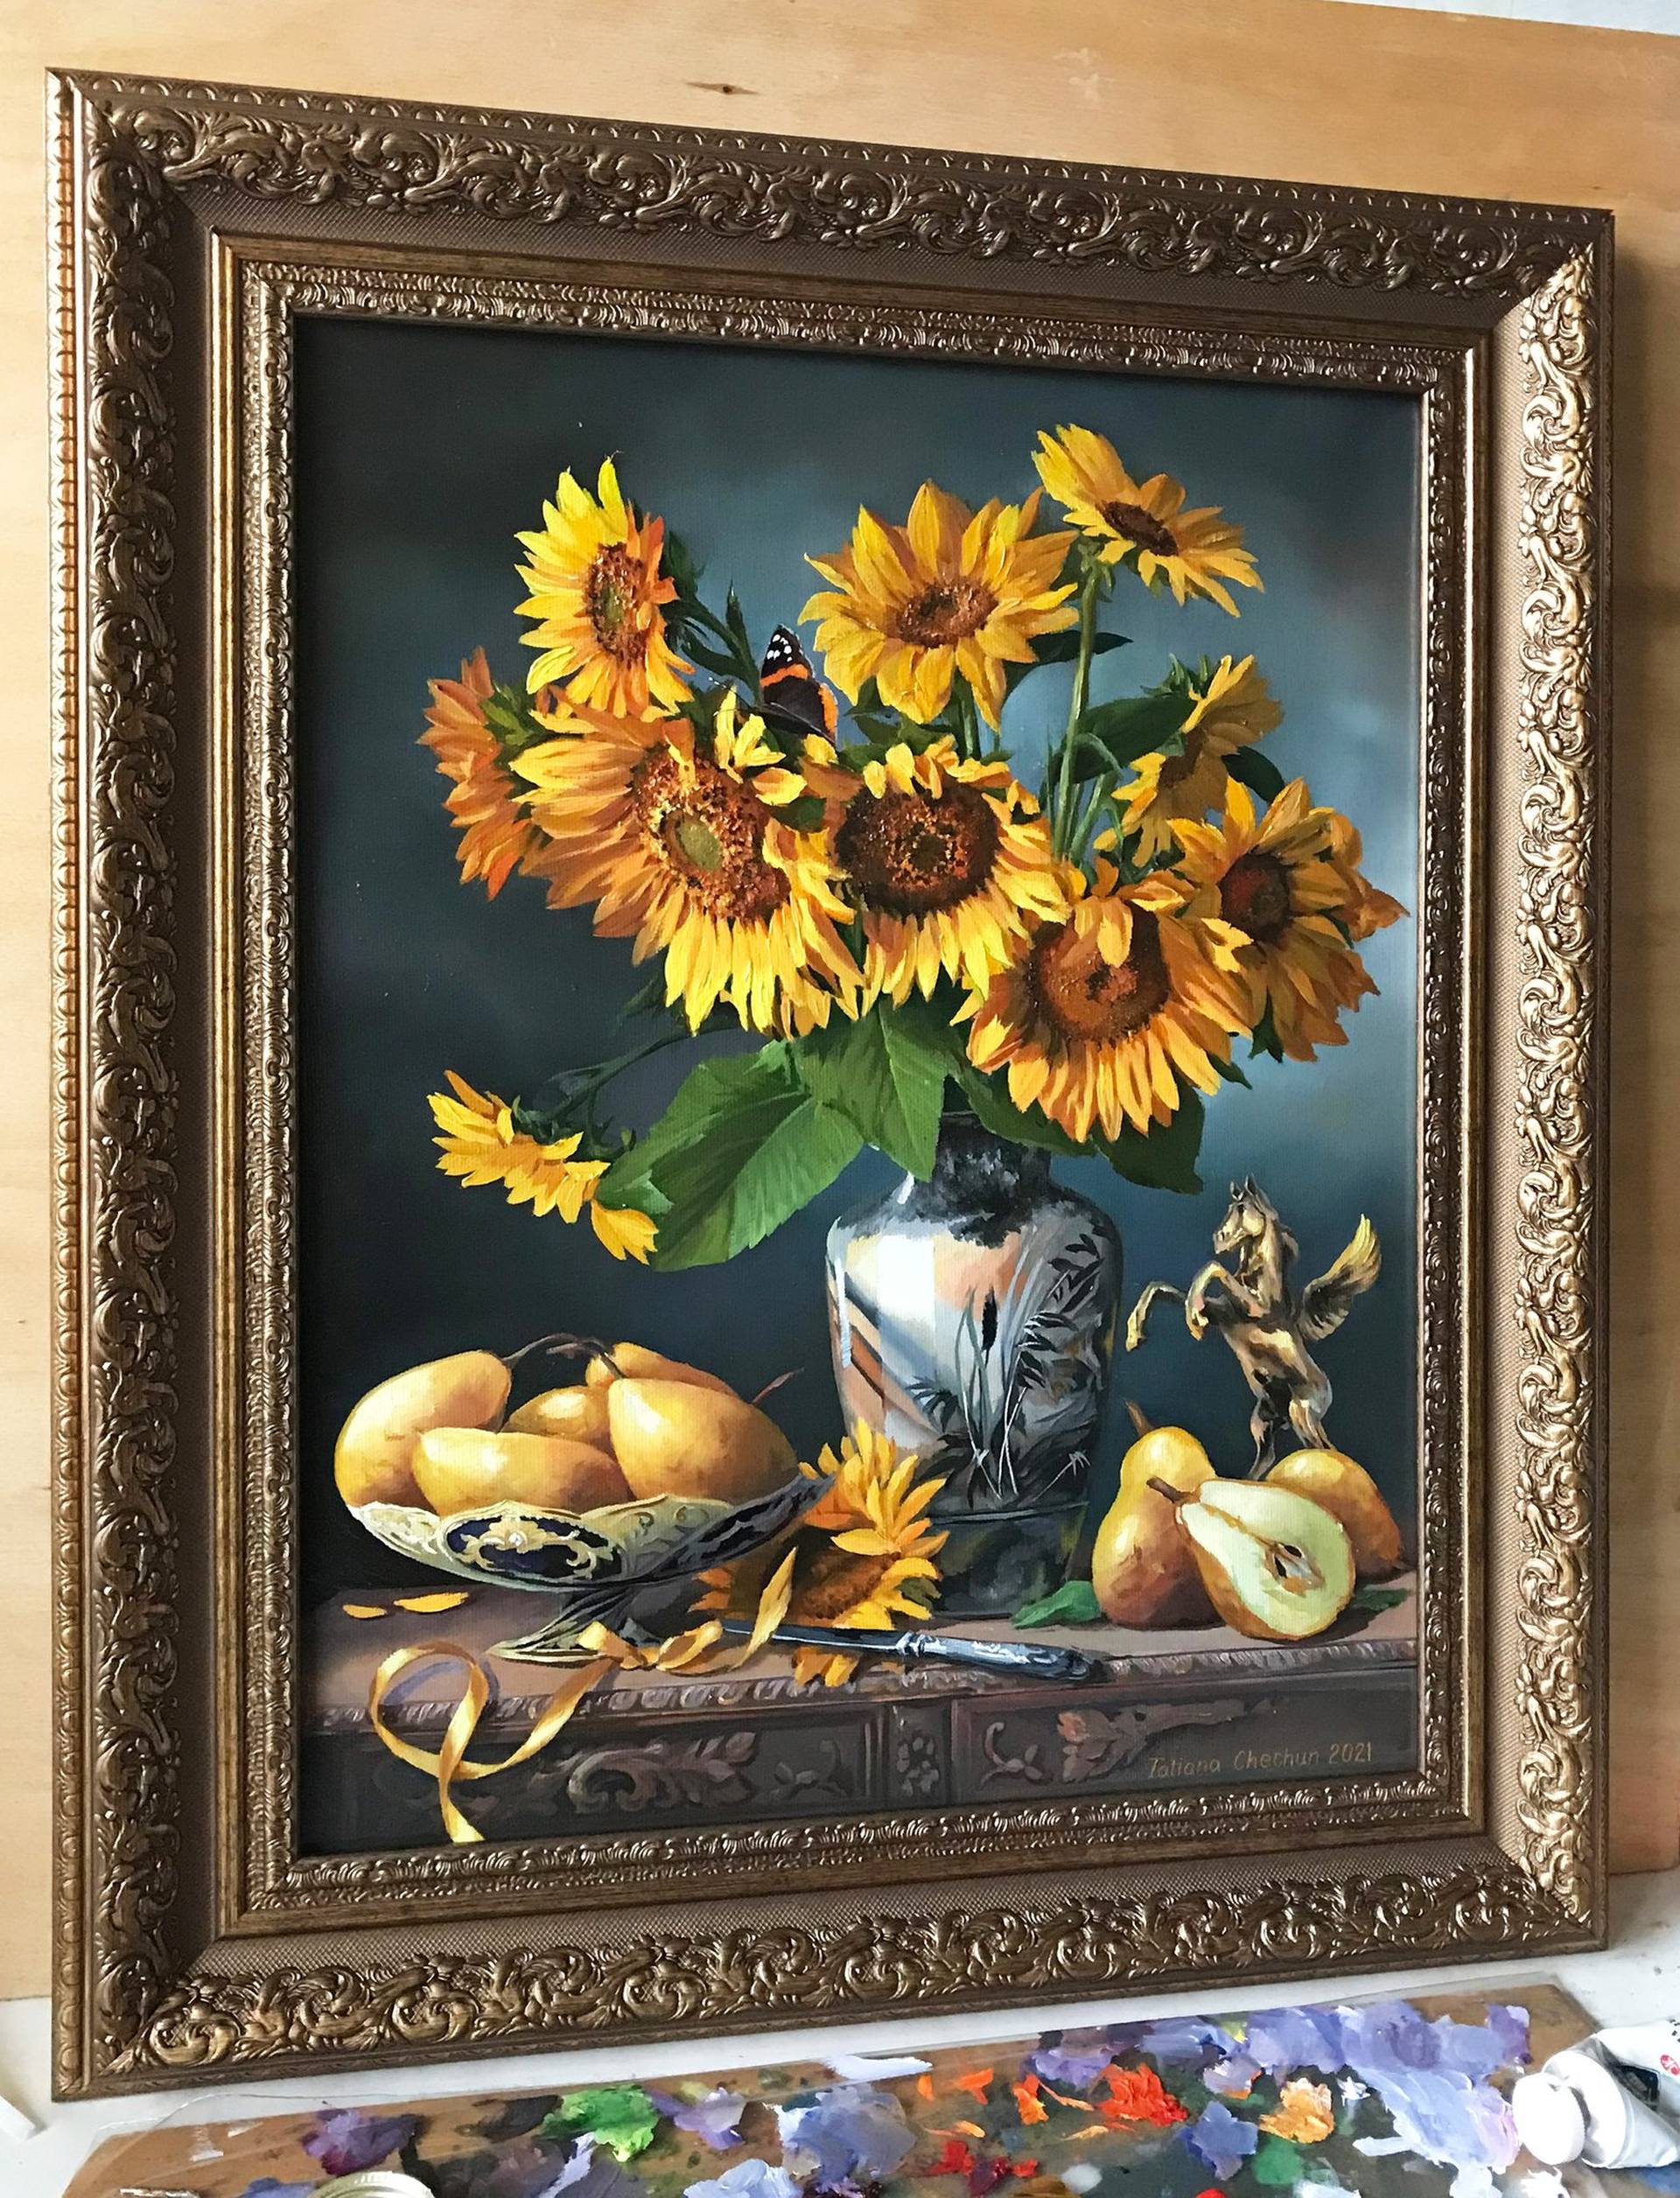 Sunflowers and pears